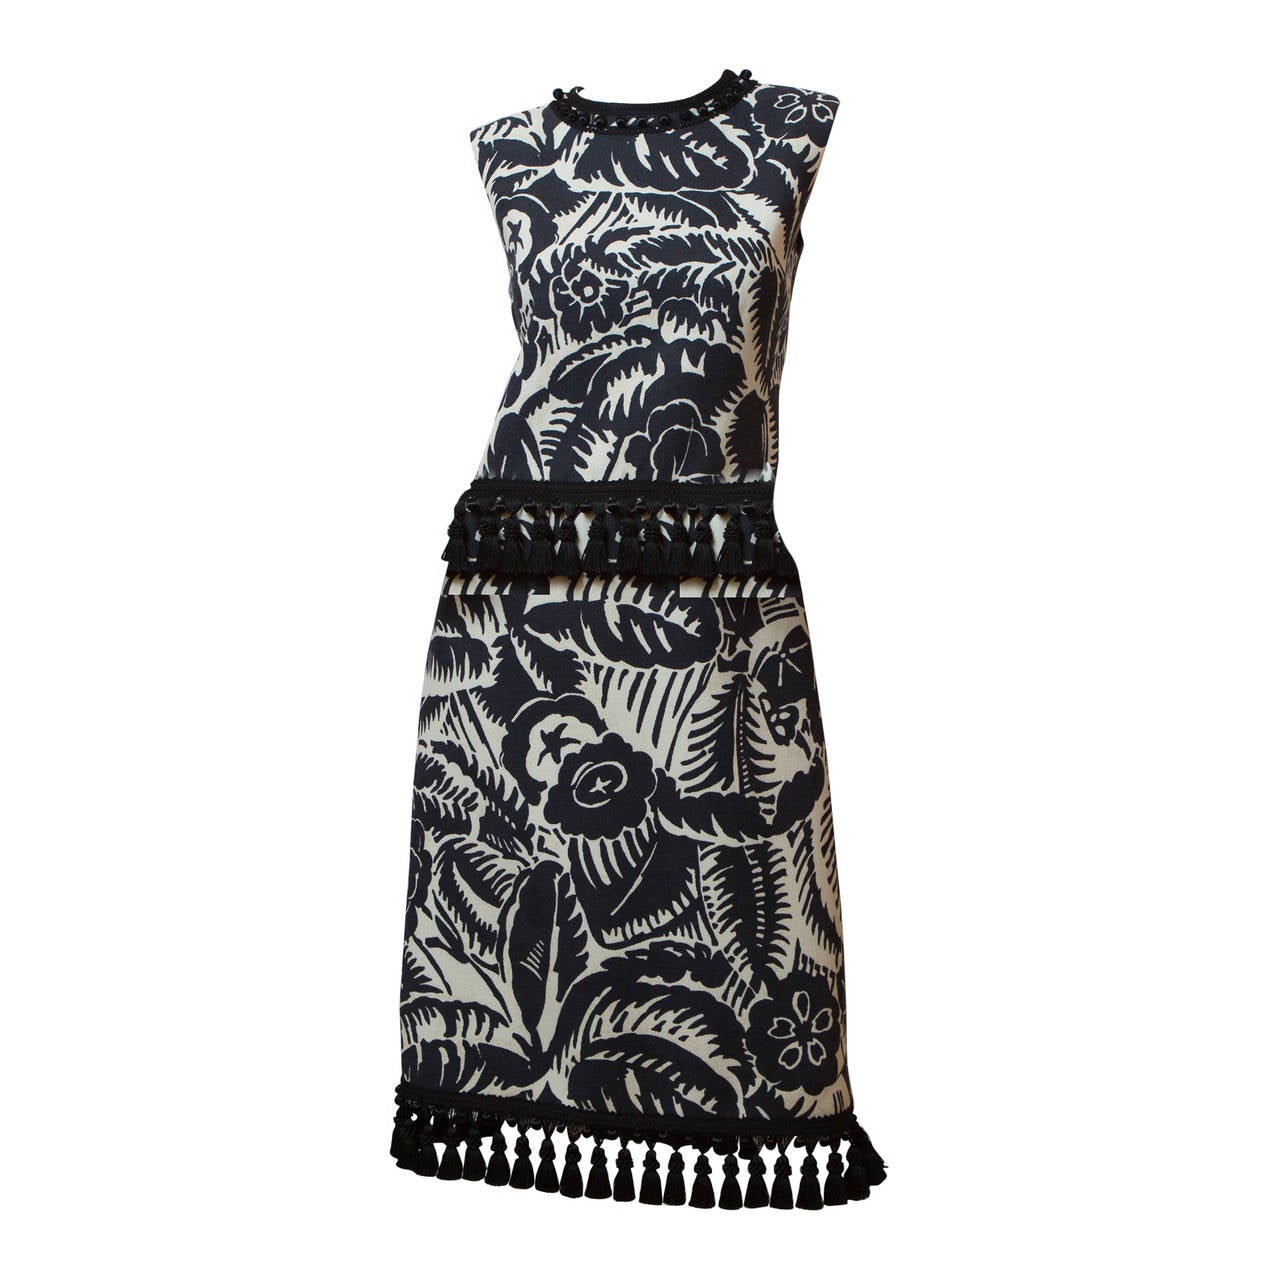 Marc Jacobs Black and White Floral Print Dress